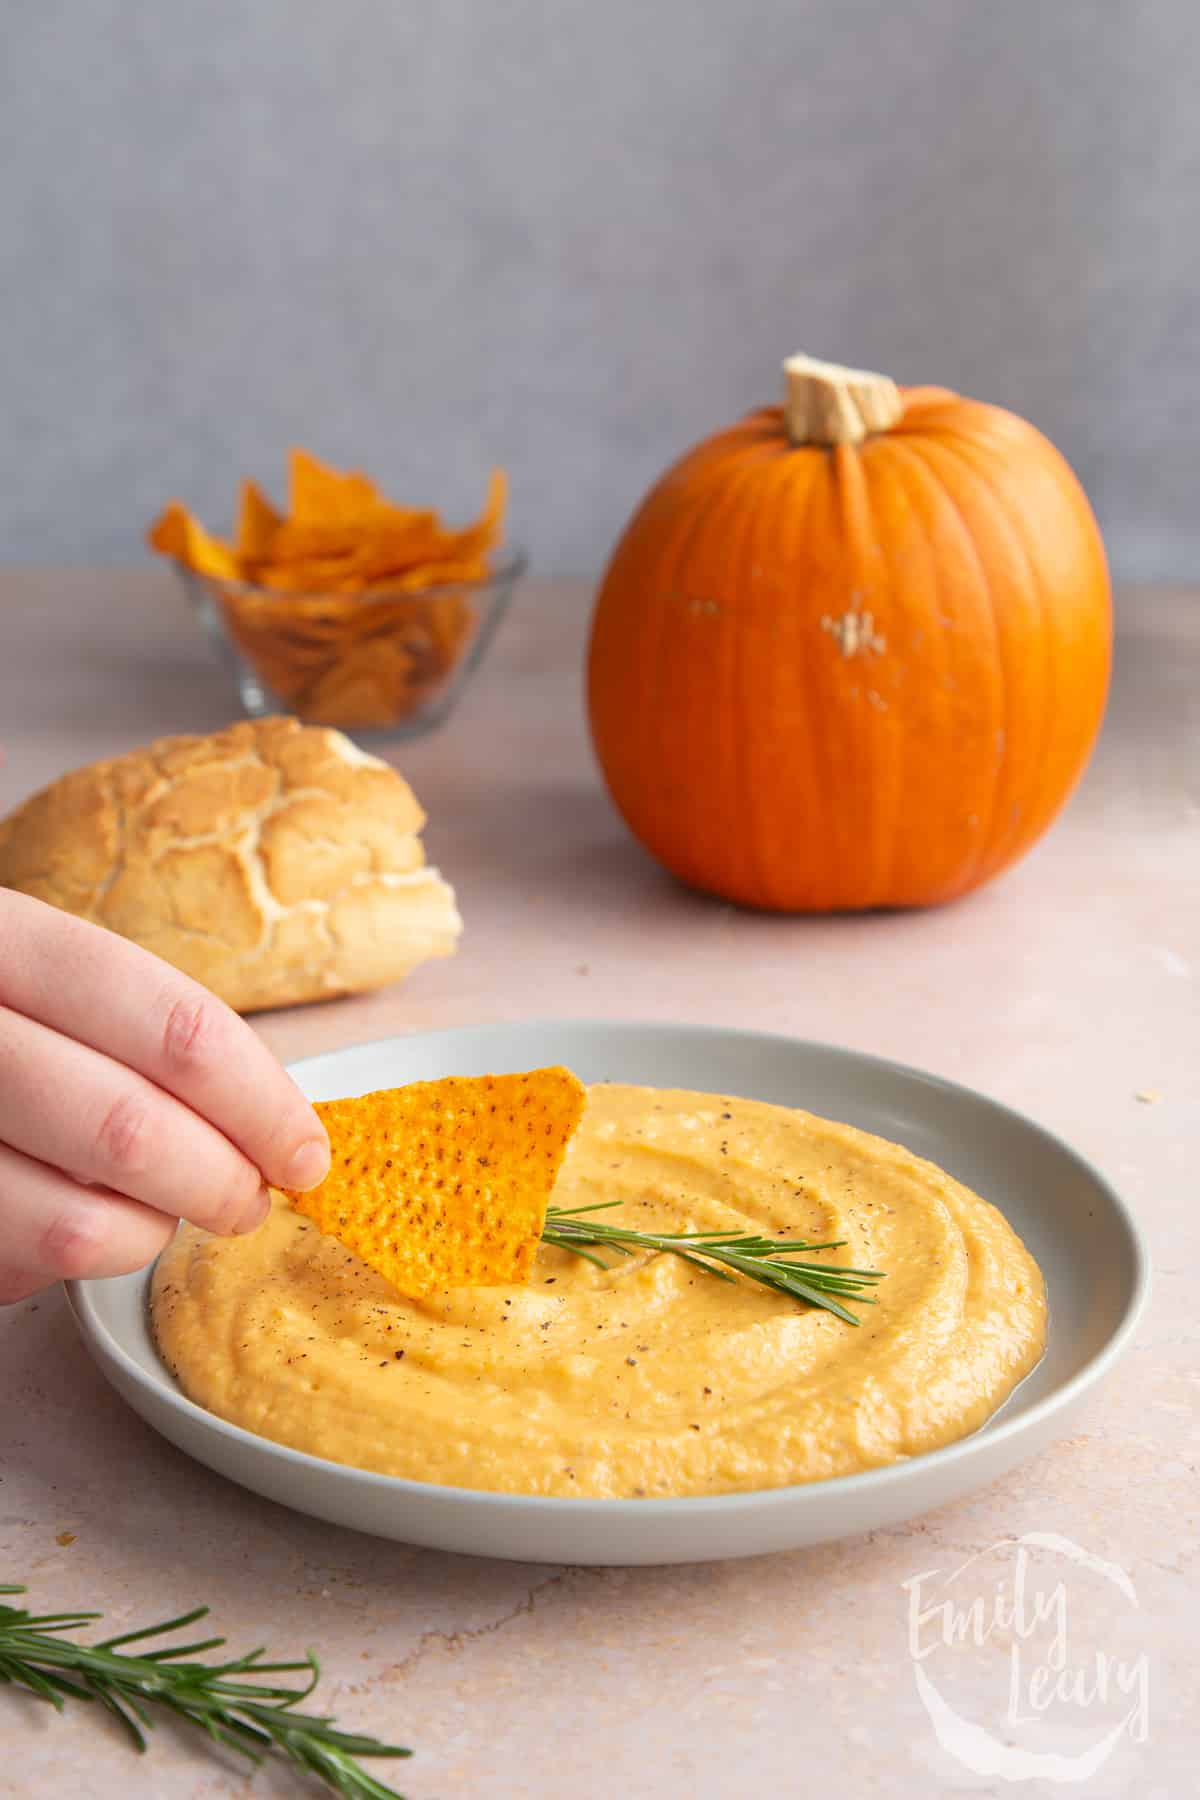 Vegan pumpkin dip in a shallow grey bowl with a sprig of rosemary. A hand dips a tortilla chip into it.